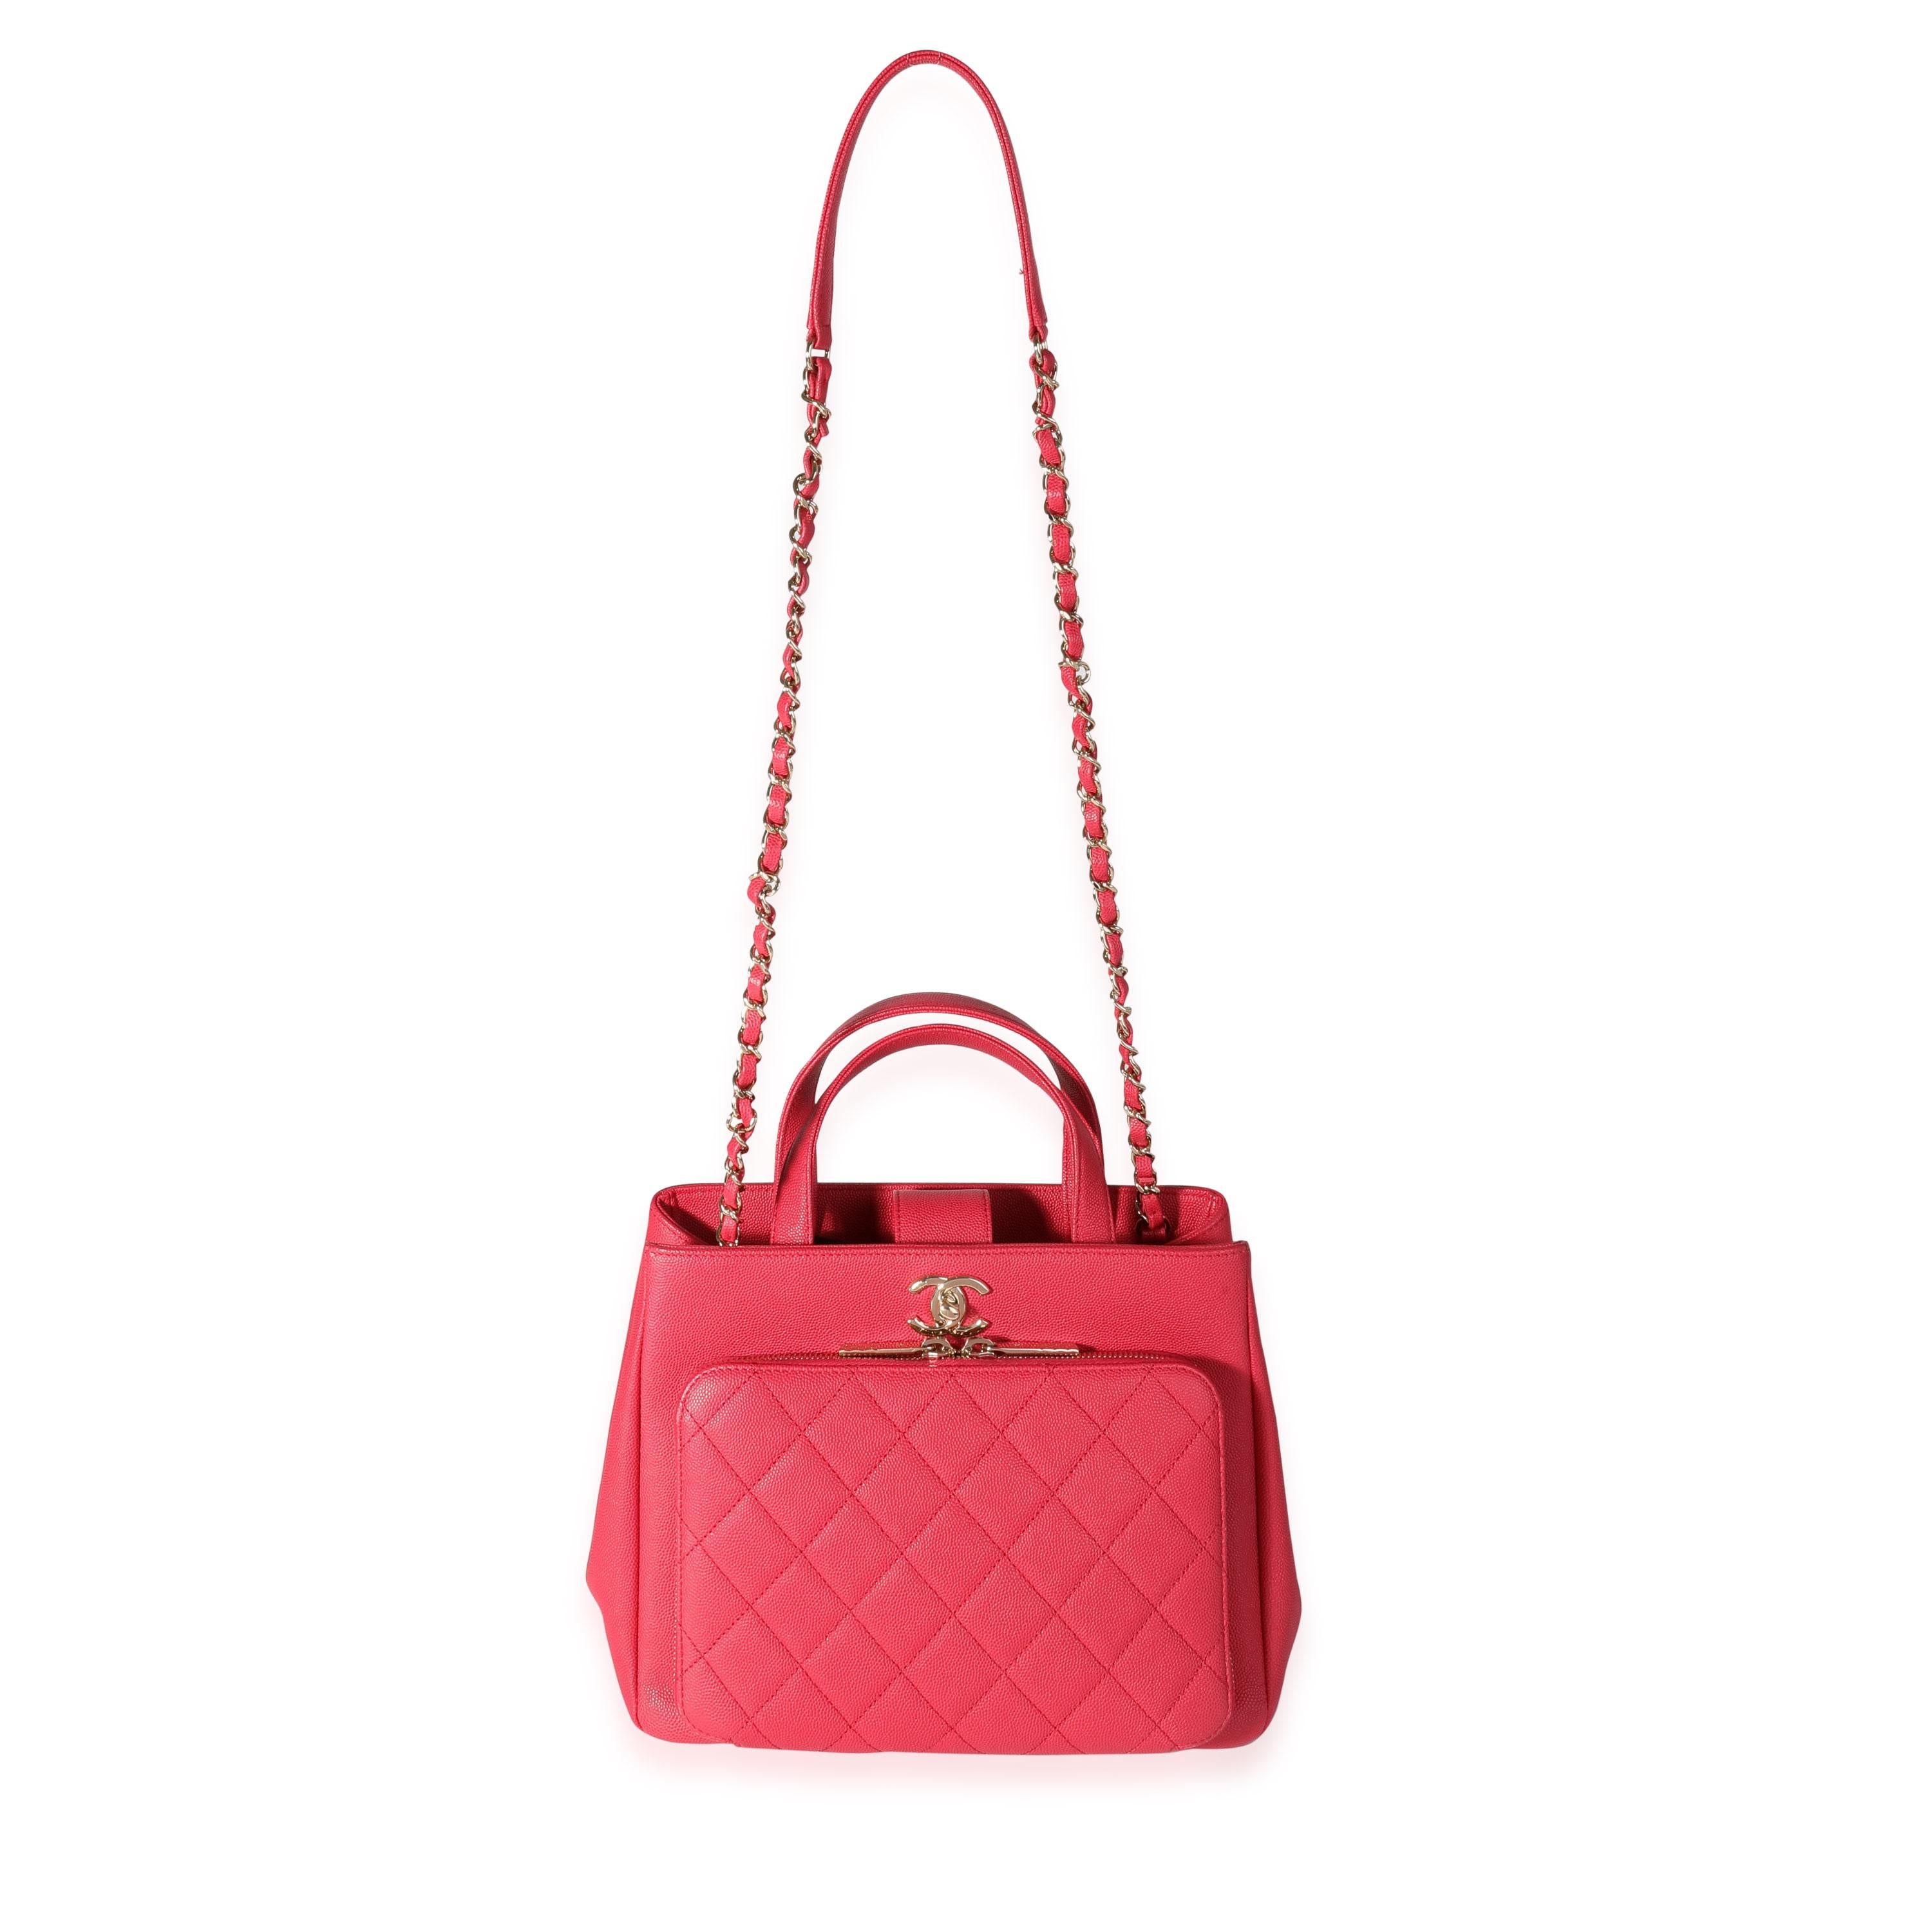 Listing Title: Chanel Red Caviar Quilted Small Business Affinity Shopping Bag
SKU: 118577
MSRP: 4600.00
Condition: Pre-owned (3000)
Handbag Condition: Very Good
Condition Comments: Very Good Condition. Scuffing to top and bottom corners. Slight